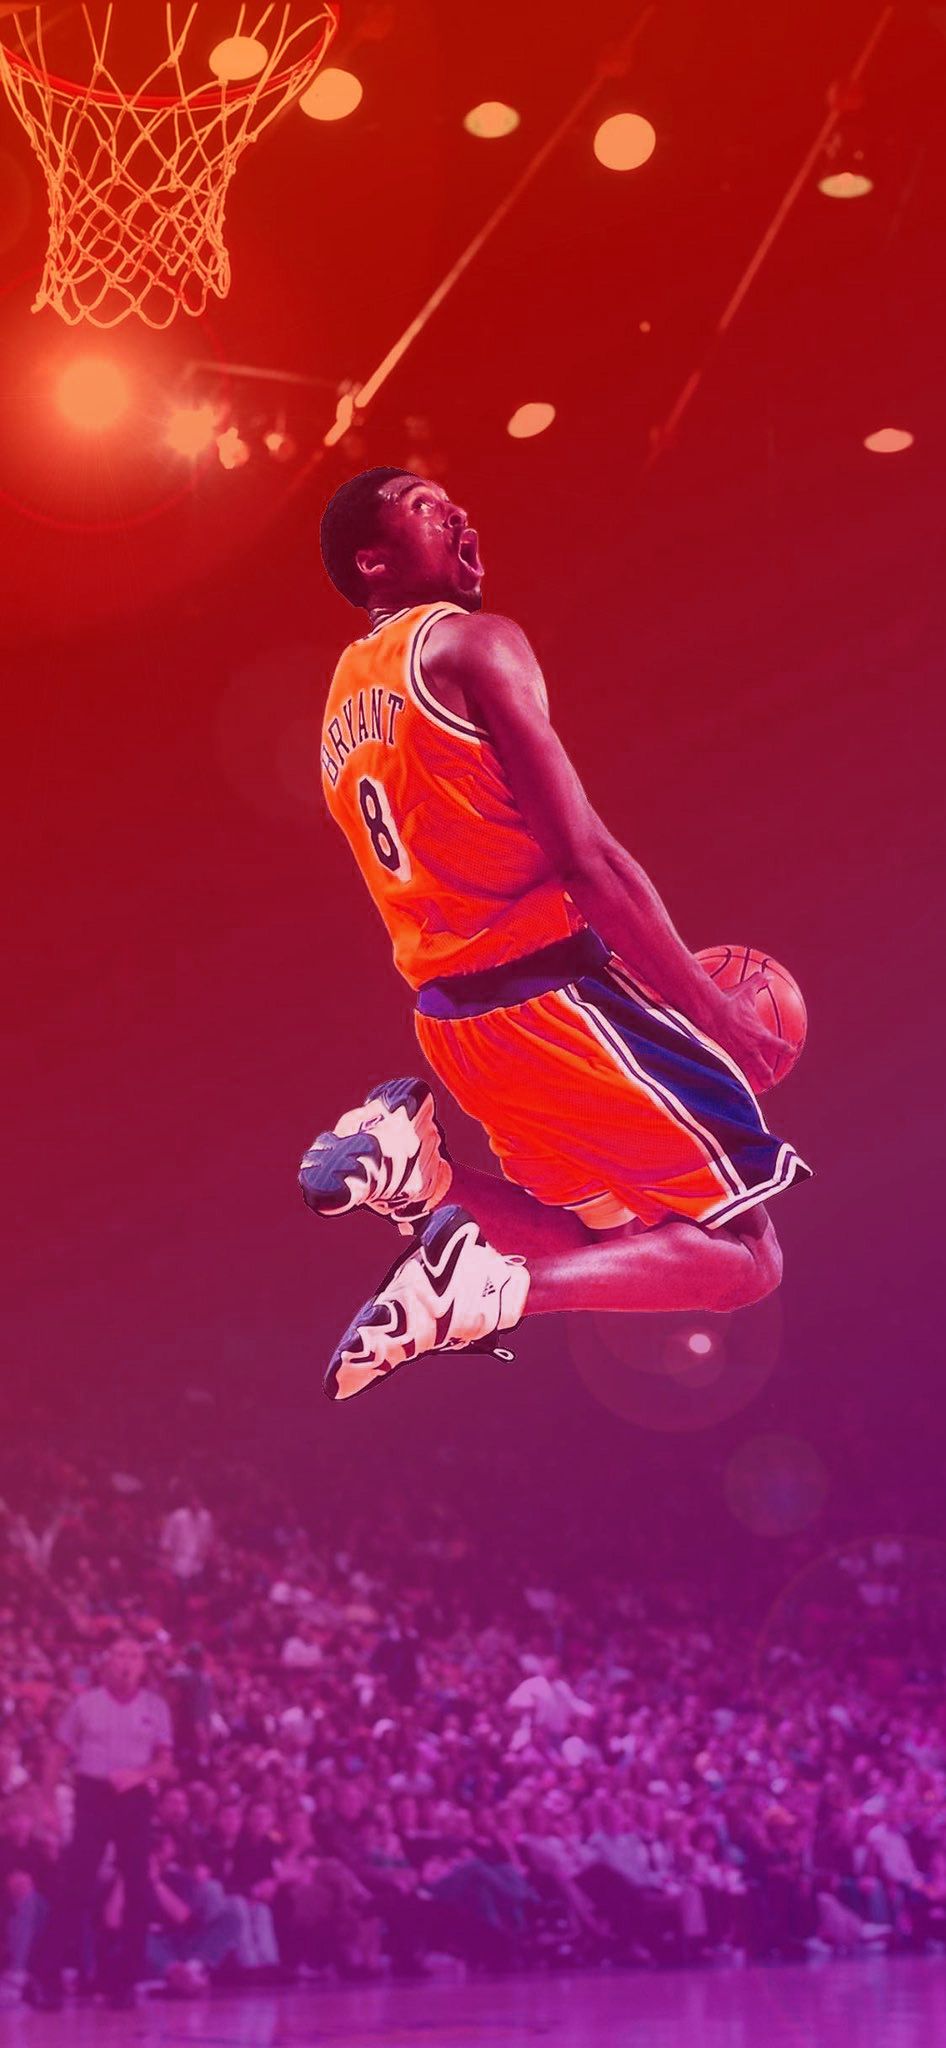 A man in an orange jersey jumping for the basketball - NBA